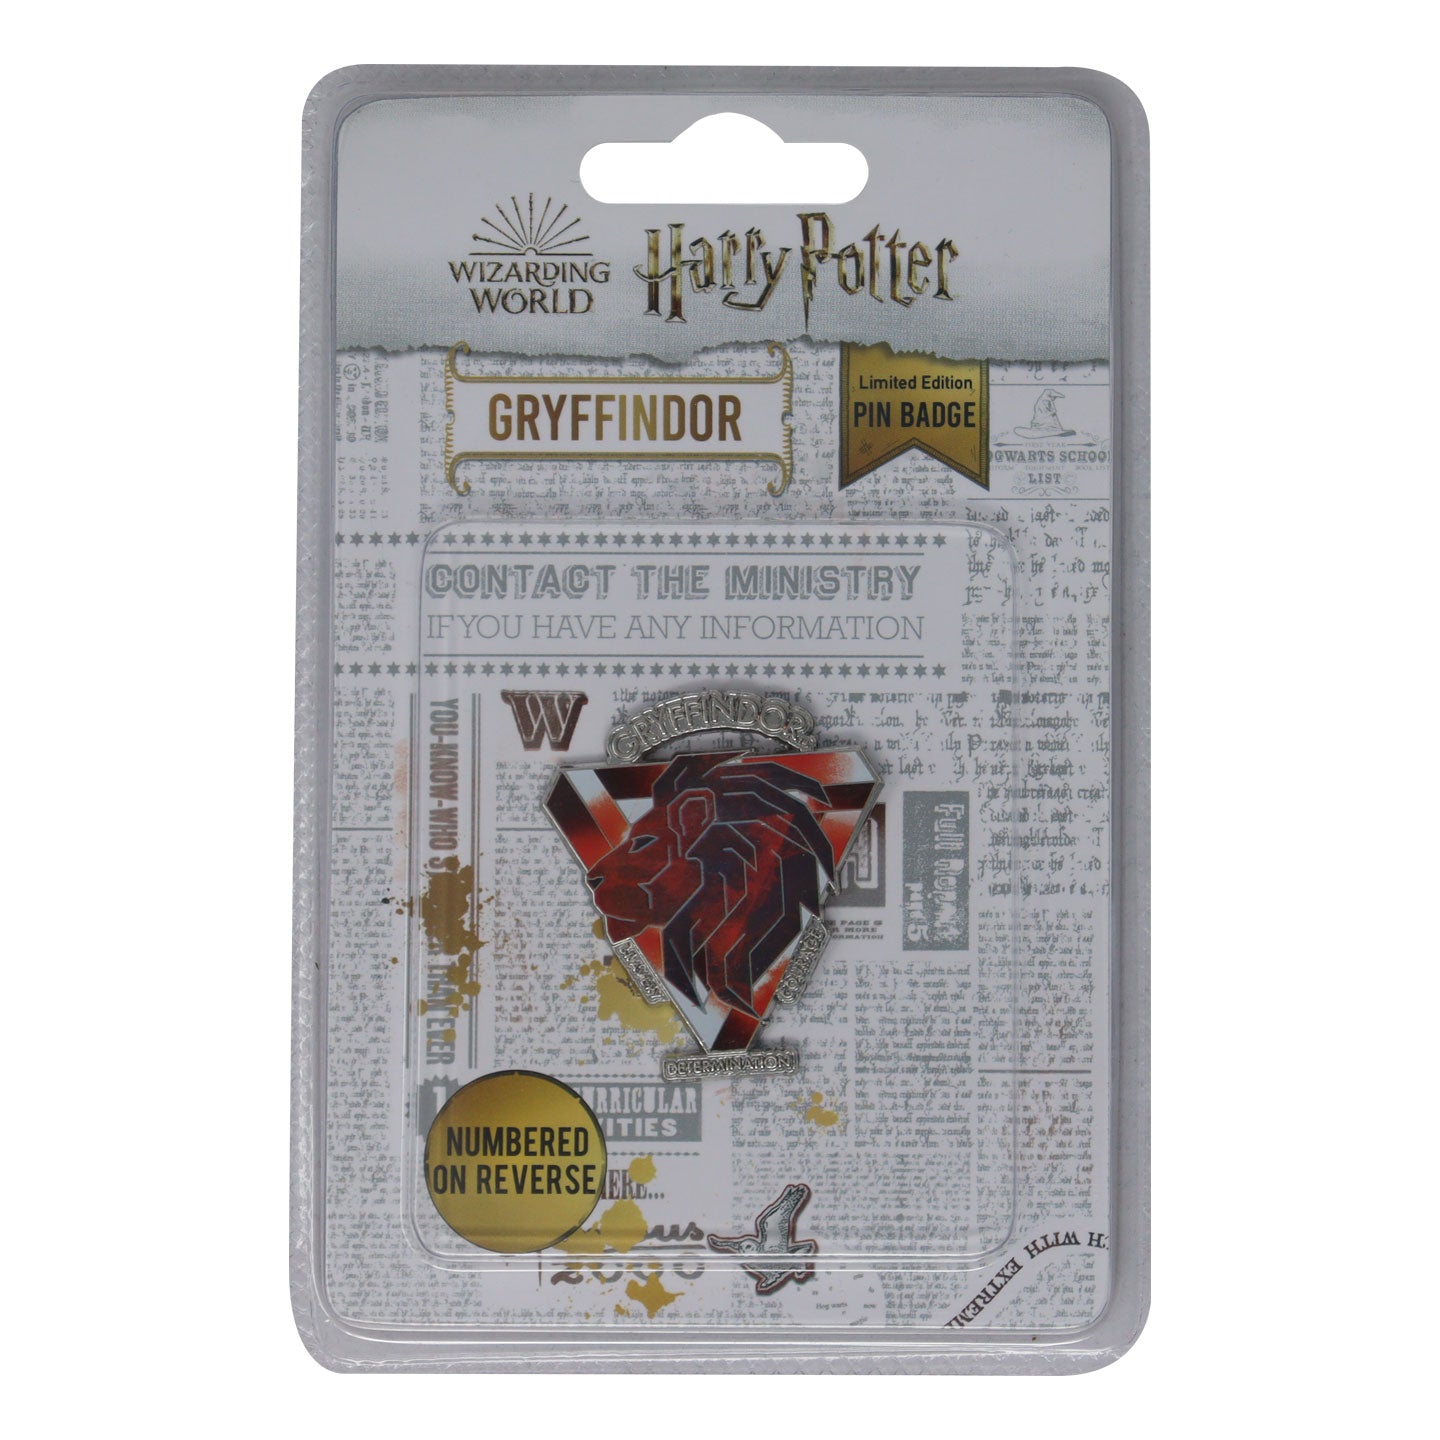 Harry Potter Limited Edition Gryffindor House Pin Badge